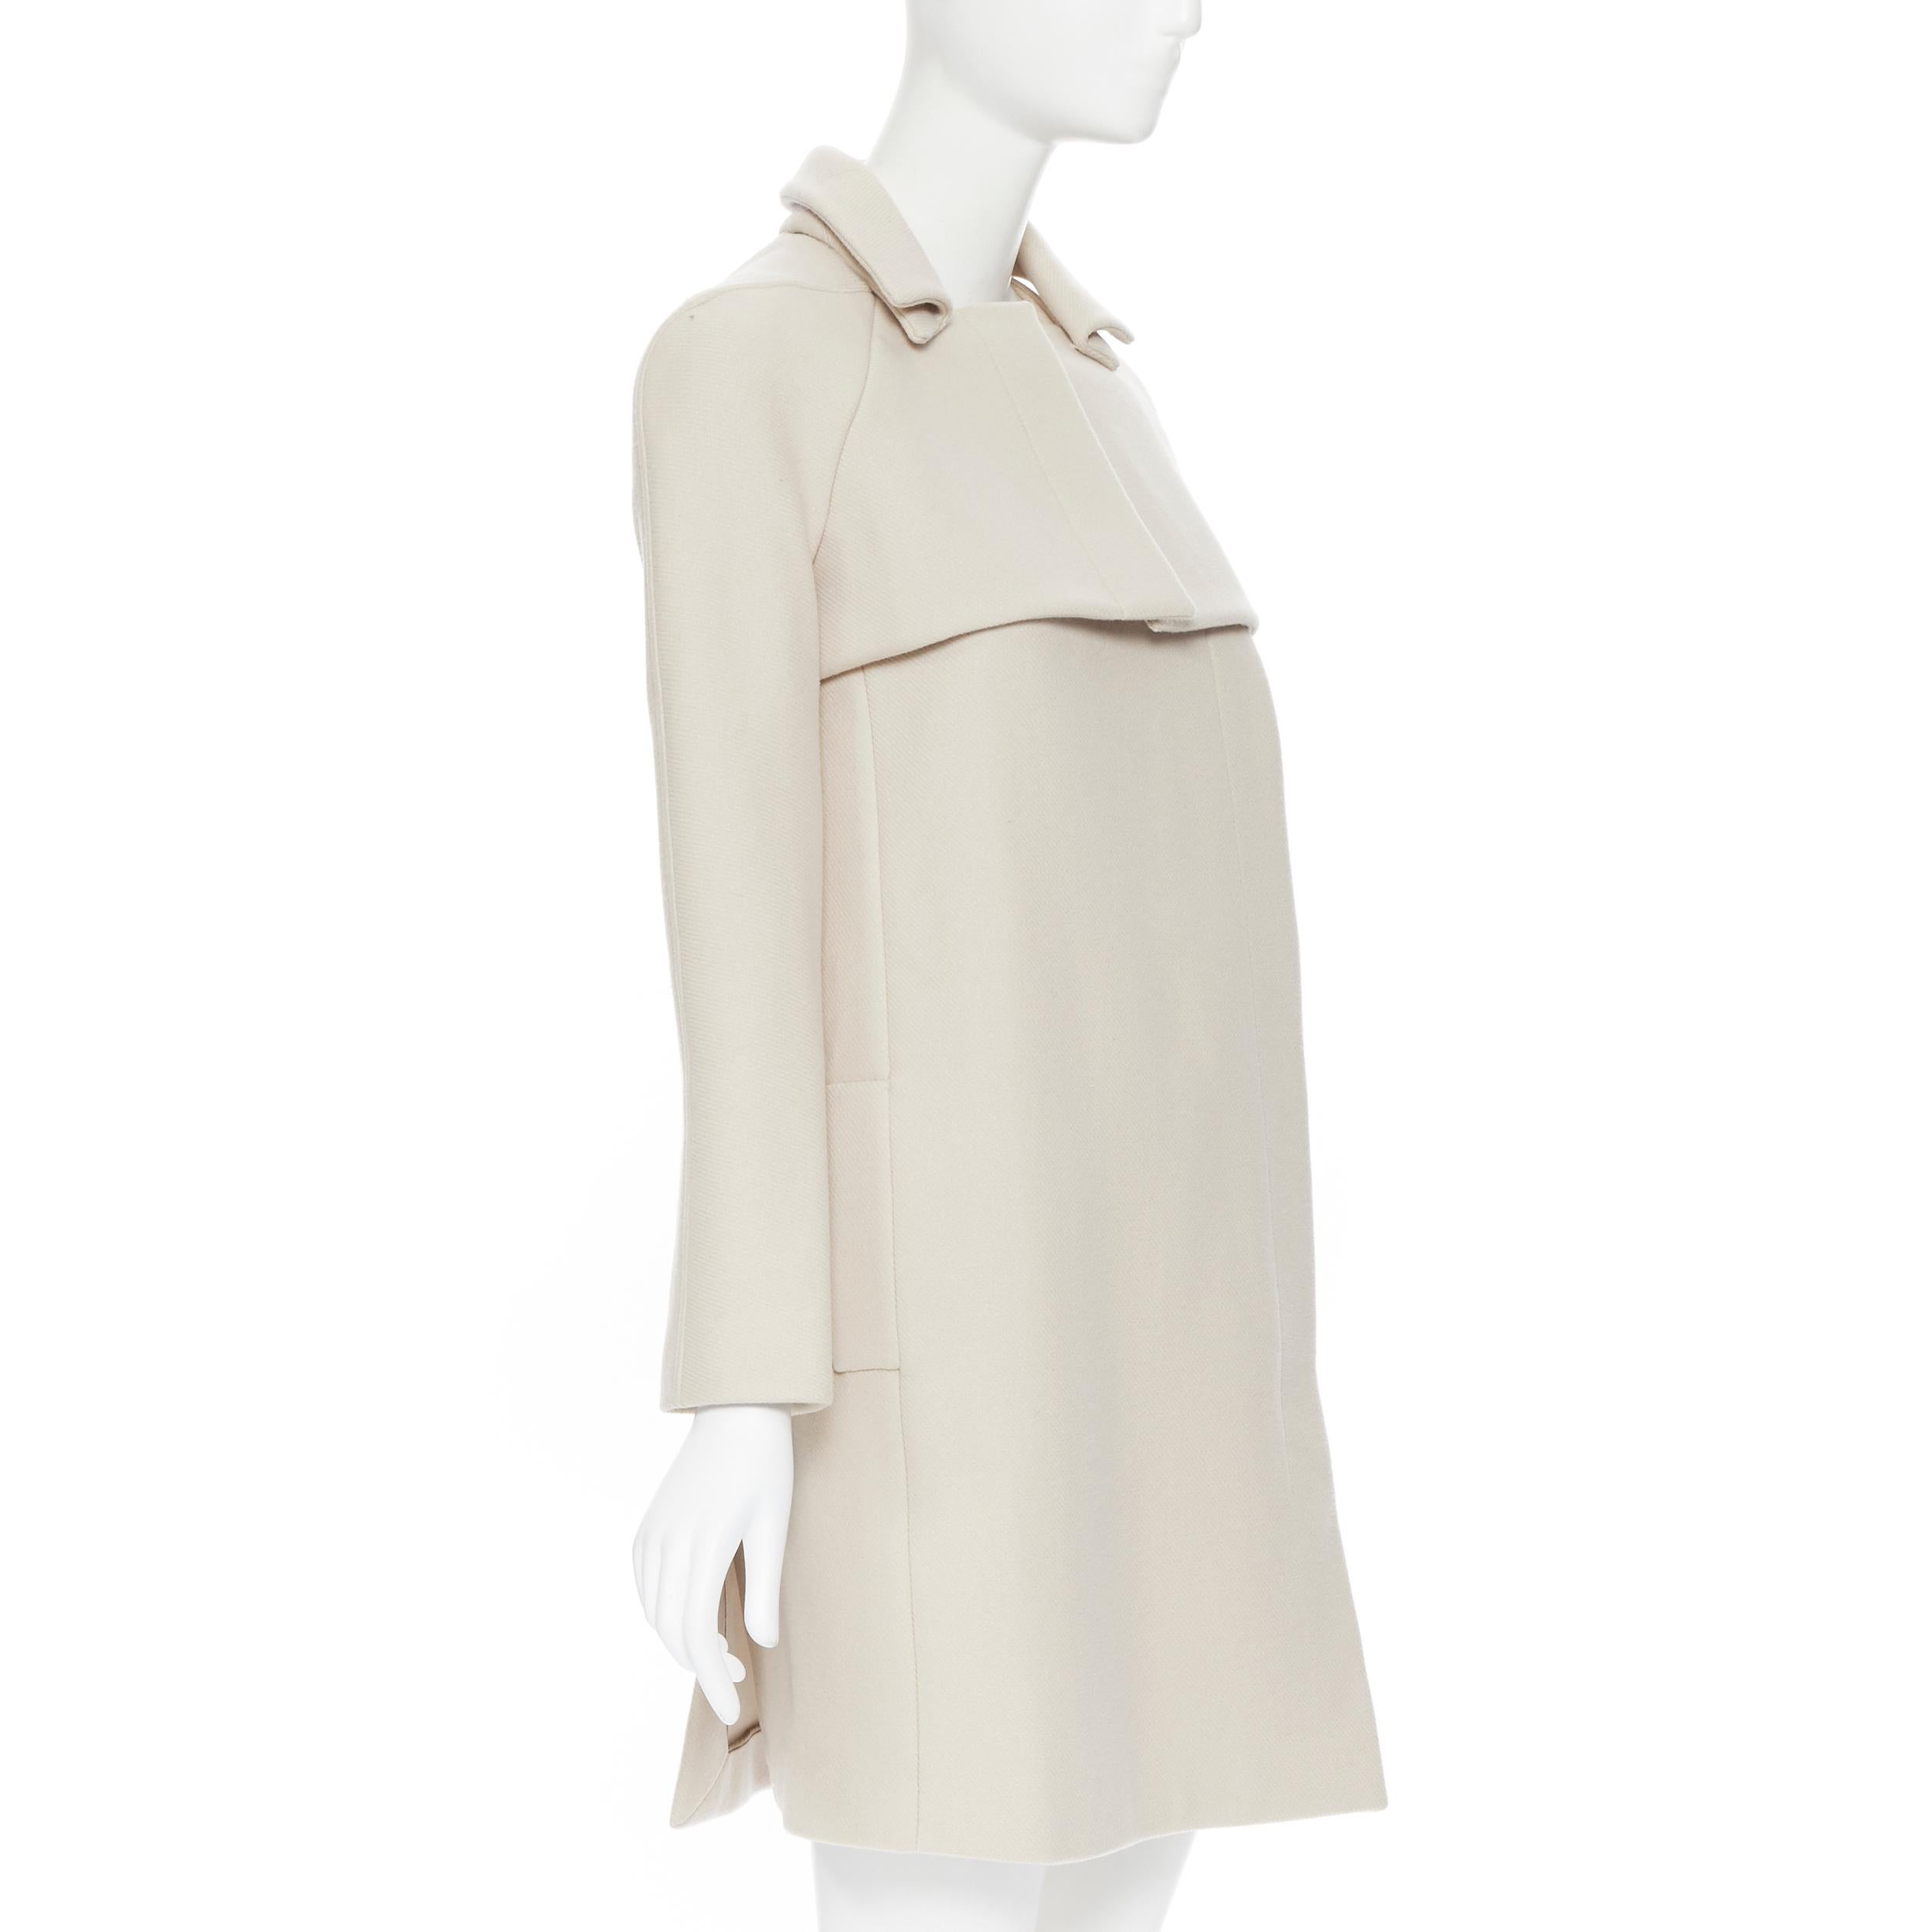 Beige GUCCI 2010 wool cashmere blend taupe beige layered minimal over coat IT36 XS